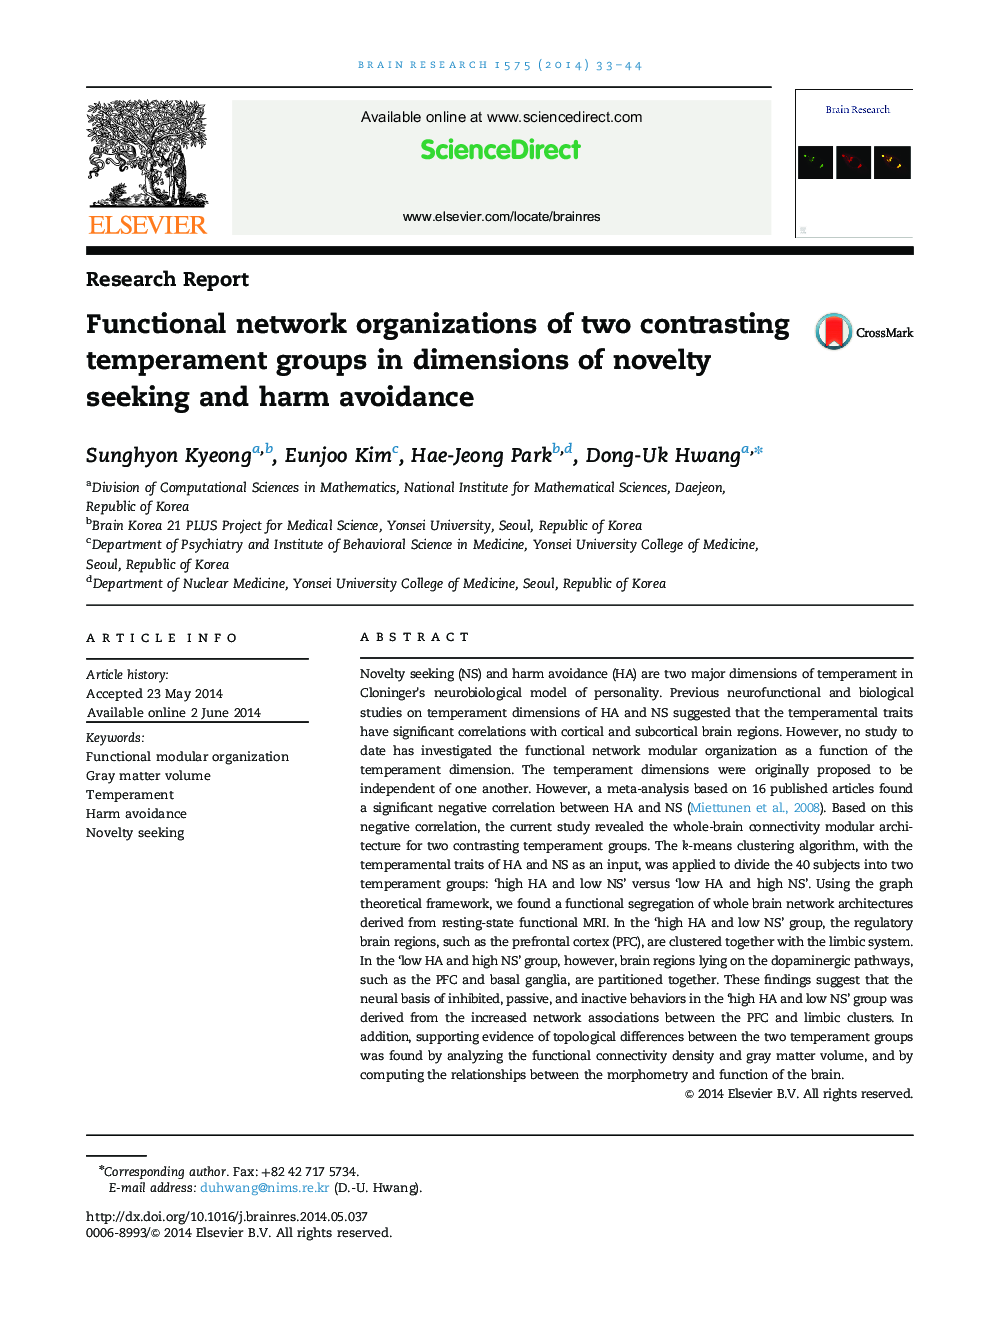 Functional network organizations of two contrasting temperament groups in dimensions of novelty seeking and harm avoidance